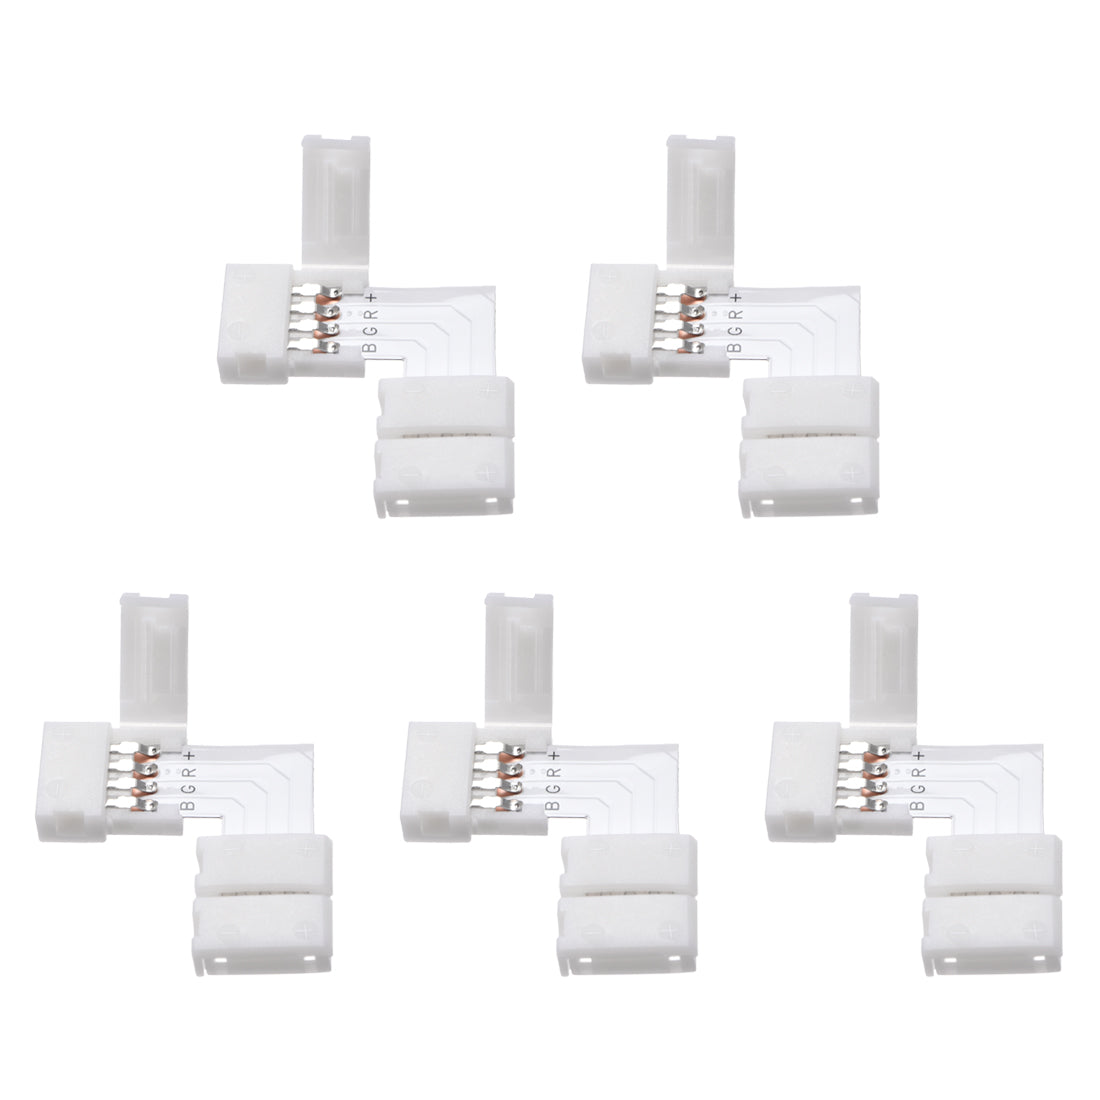 Uxcell Uxcell 10mm 4P L-shape LED Strip Connector Right Angle Corner Connectors Clip for 5050 RGB 4 Conductor LED Strip Lights Strip to Strip 5Pcs